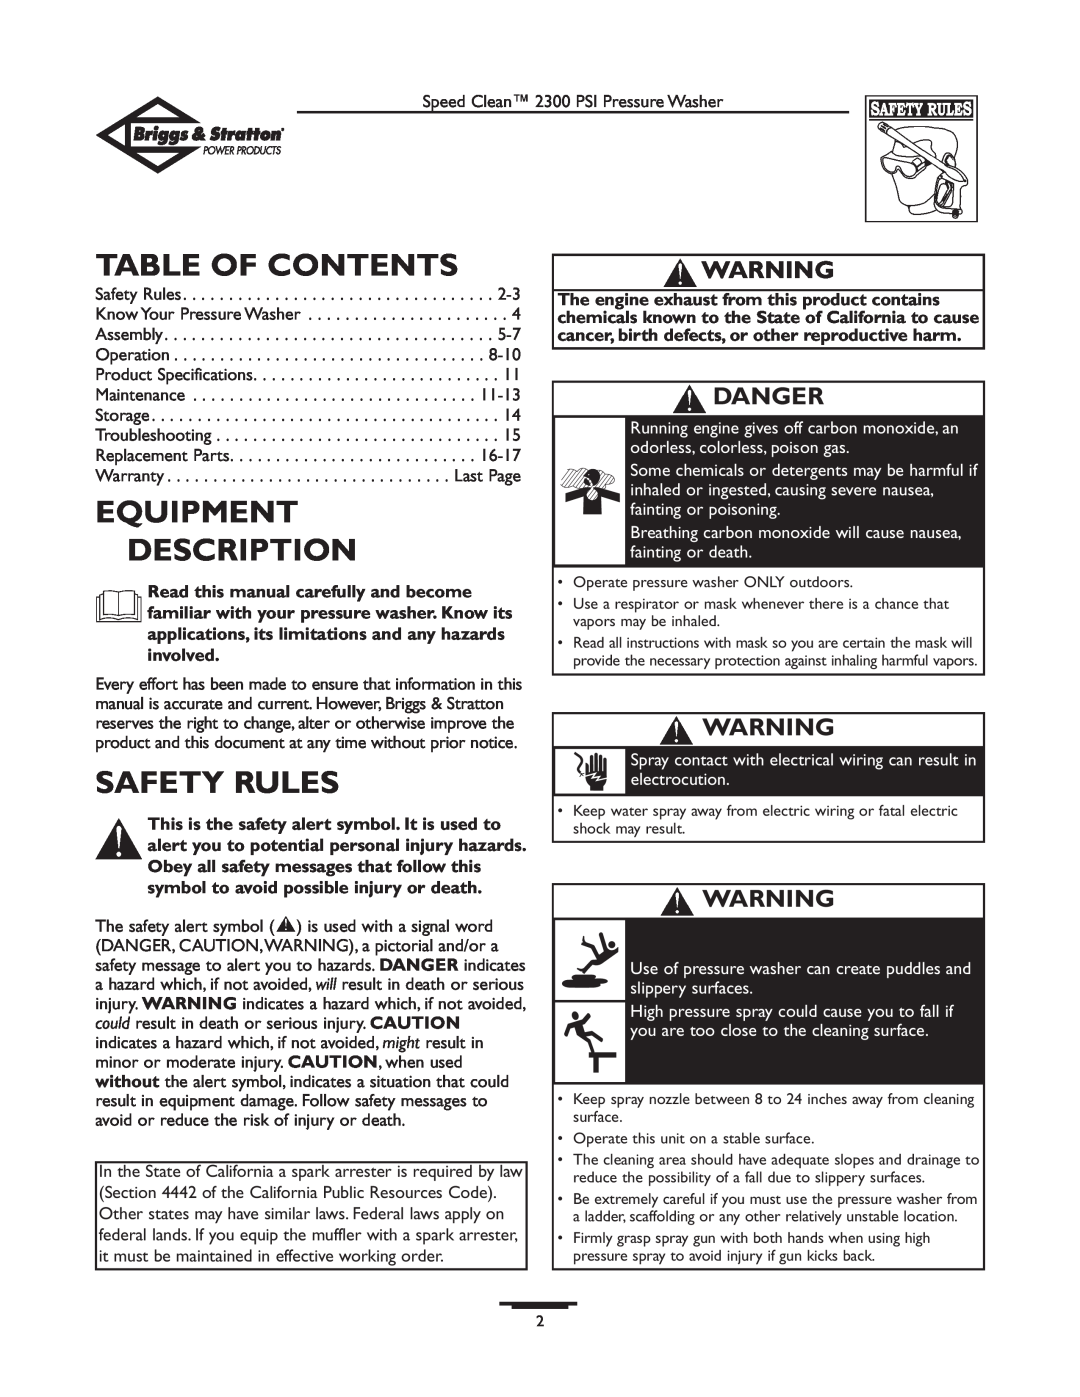 Briggs & Stratton 1909-0 owner manual Table Of Contents, Equipment Description, Safety Rules, Danger 